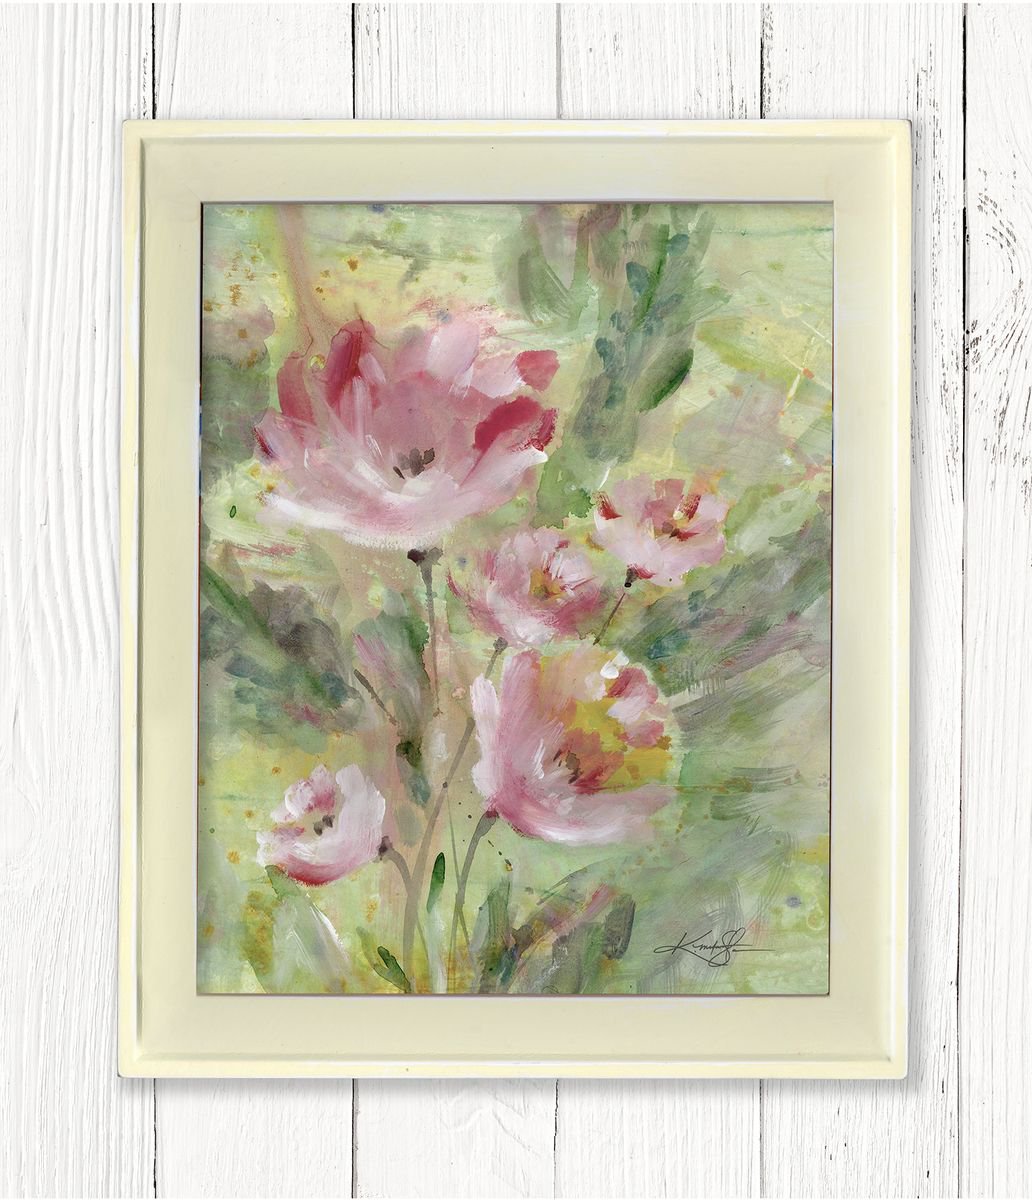 Shabby Chic Charm 14 - Framed Floral art in Painted Distressed Frame by Kathy Morton Stani... by Kathy Morton Stanion